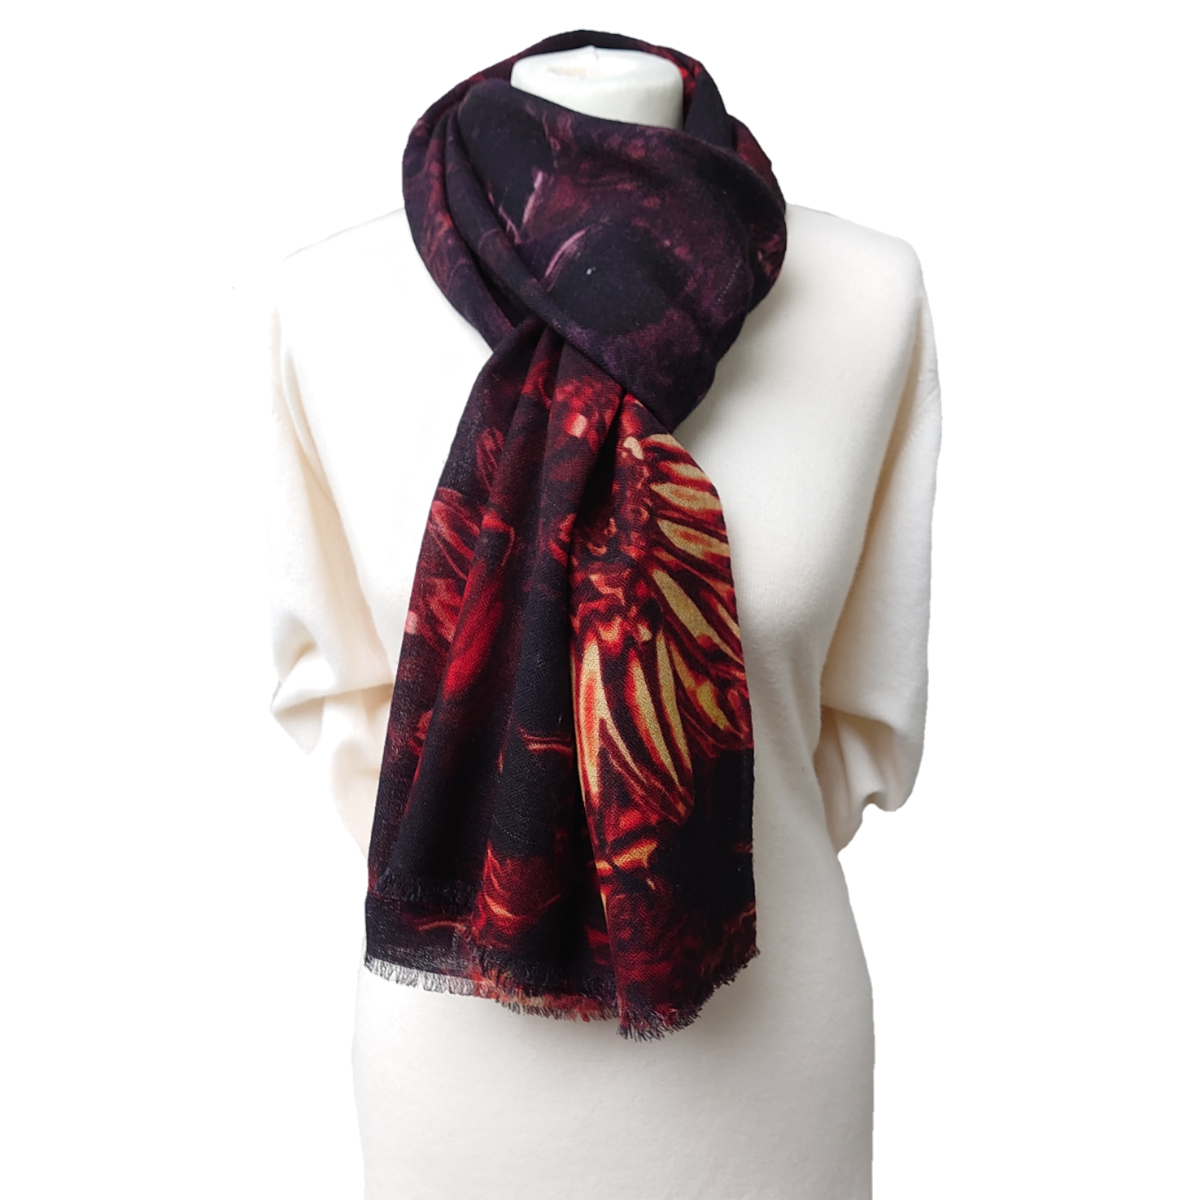 Ltd Edition 100% Pure Pashmina Cashmere Stole - Large Scarf - Black With Red Flowers Print